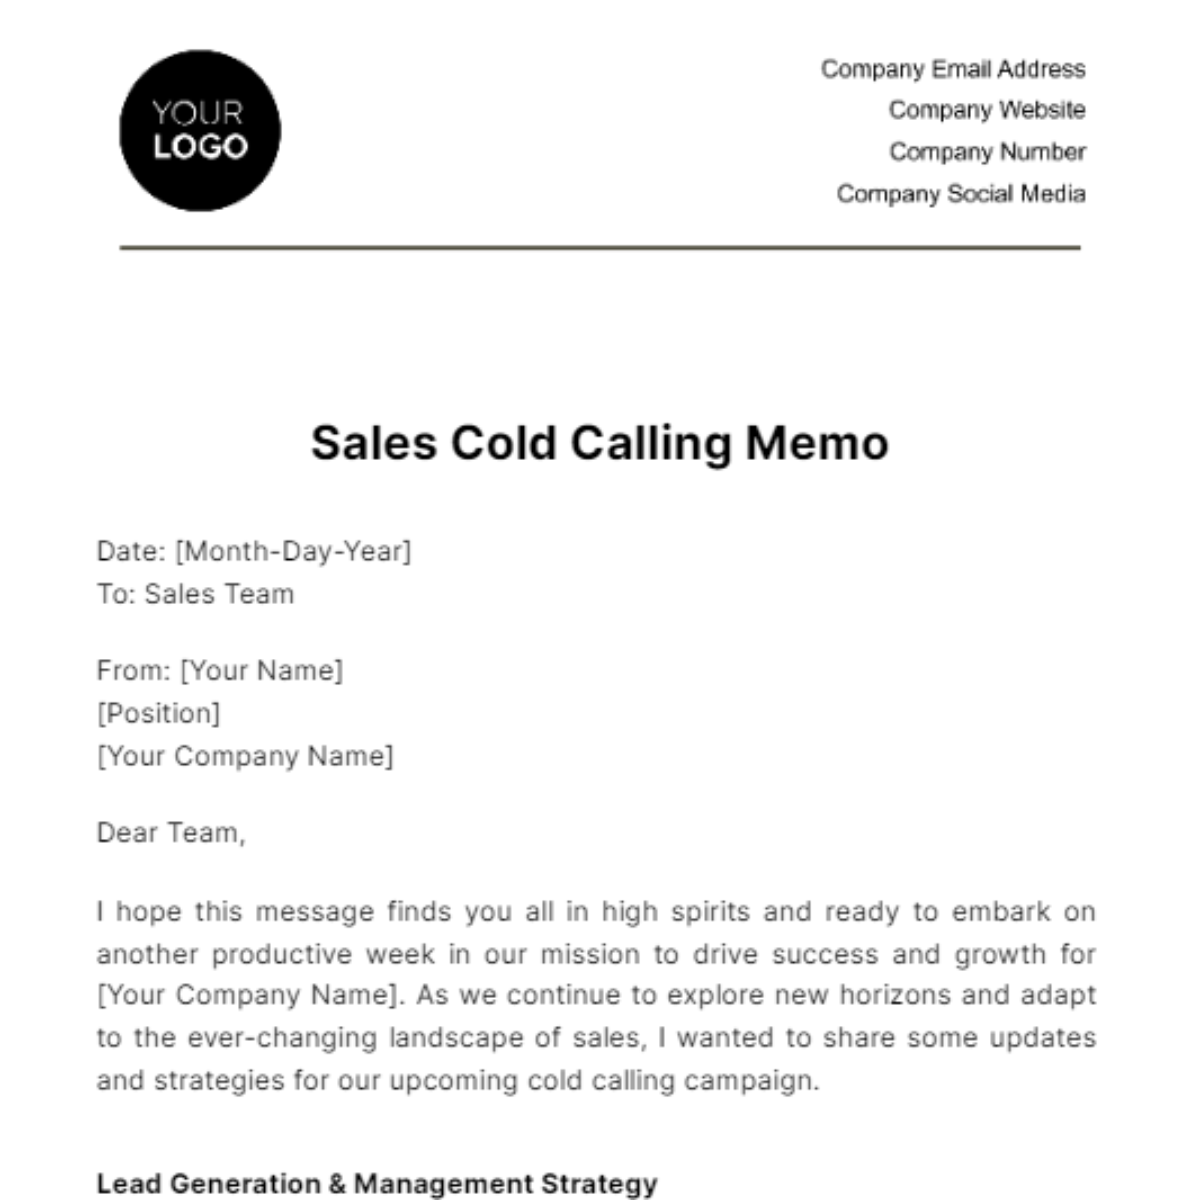 Free Sales Cold Calling Memo Template